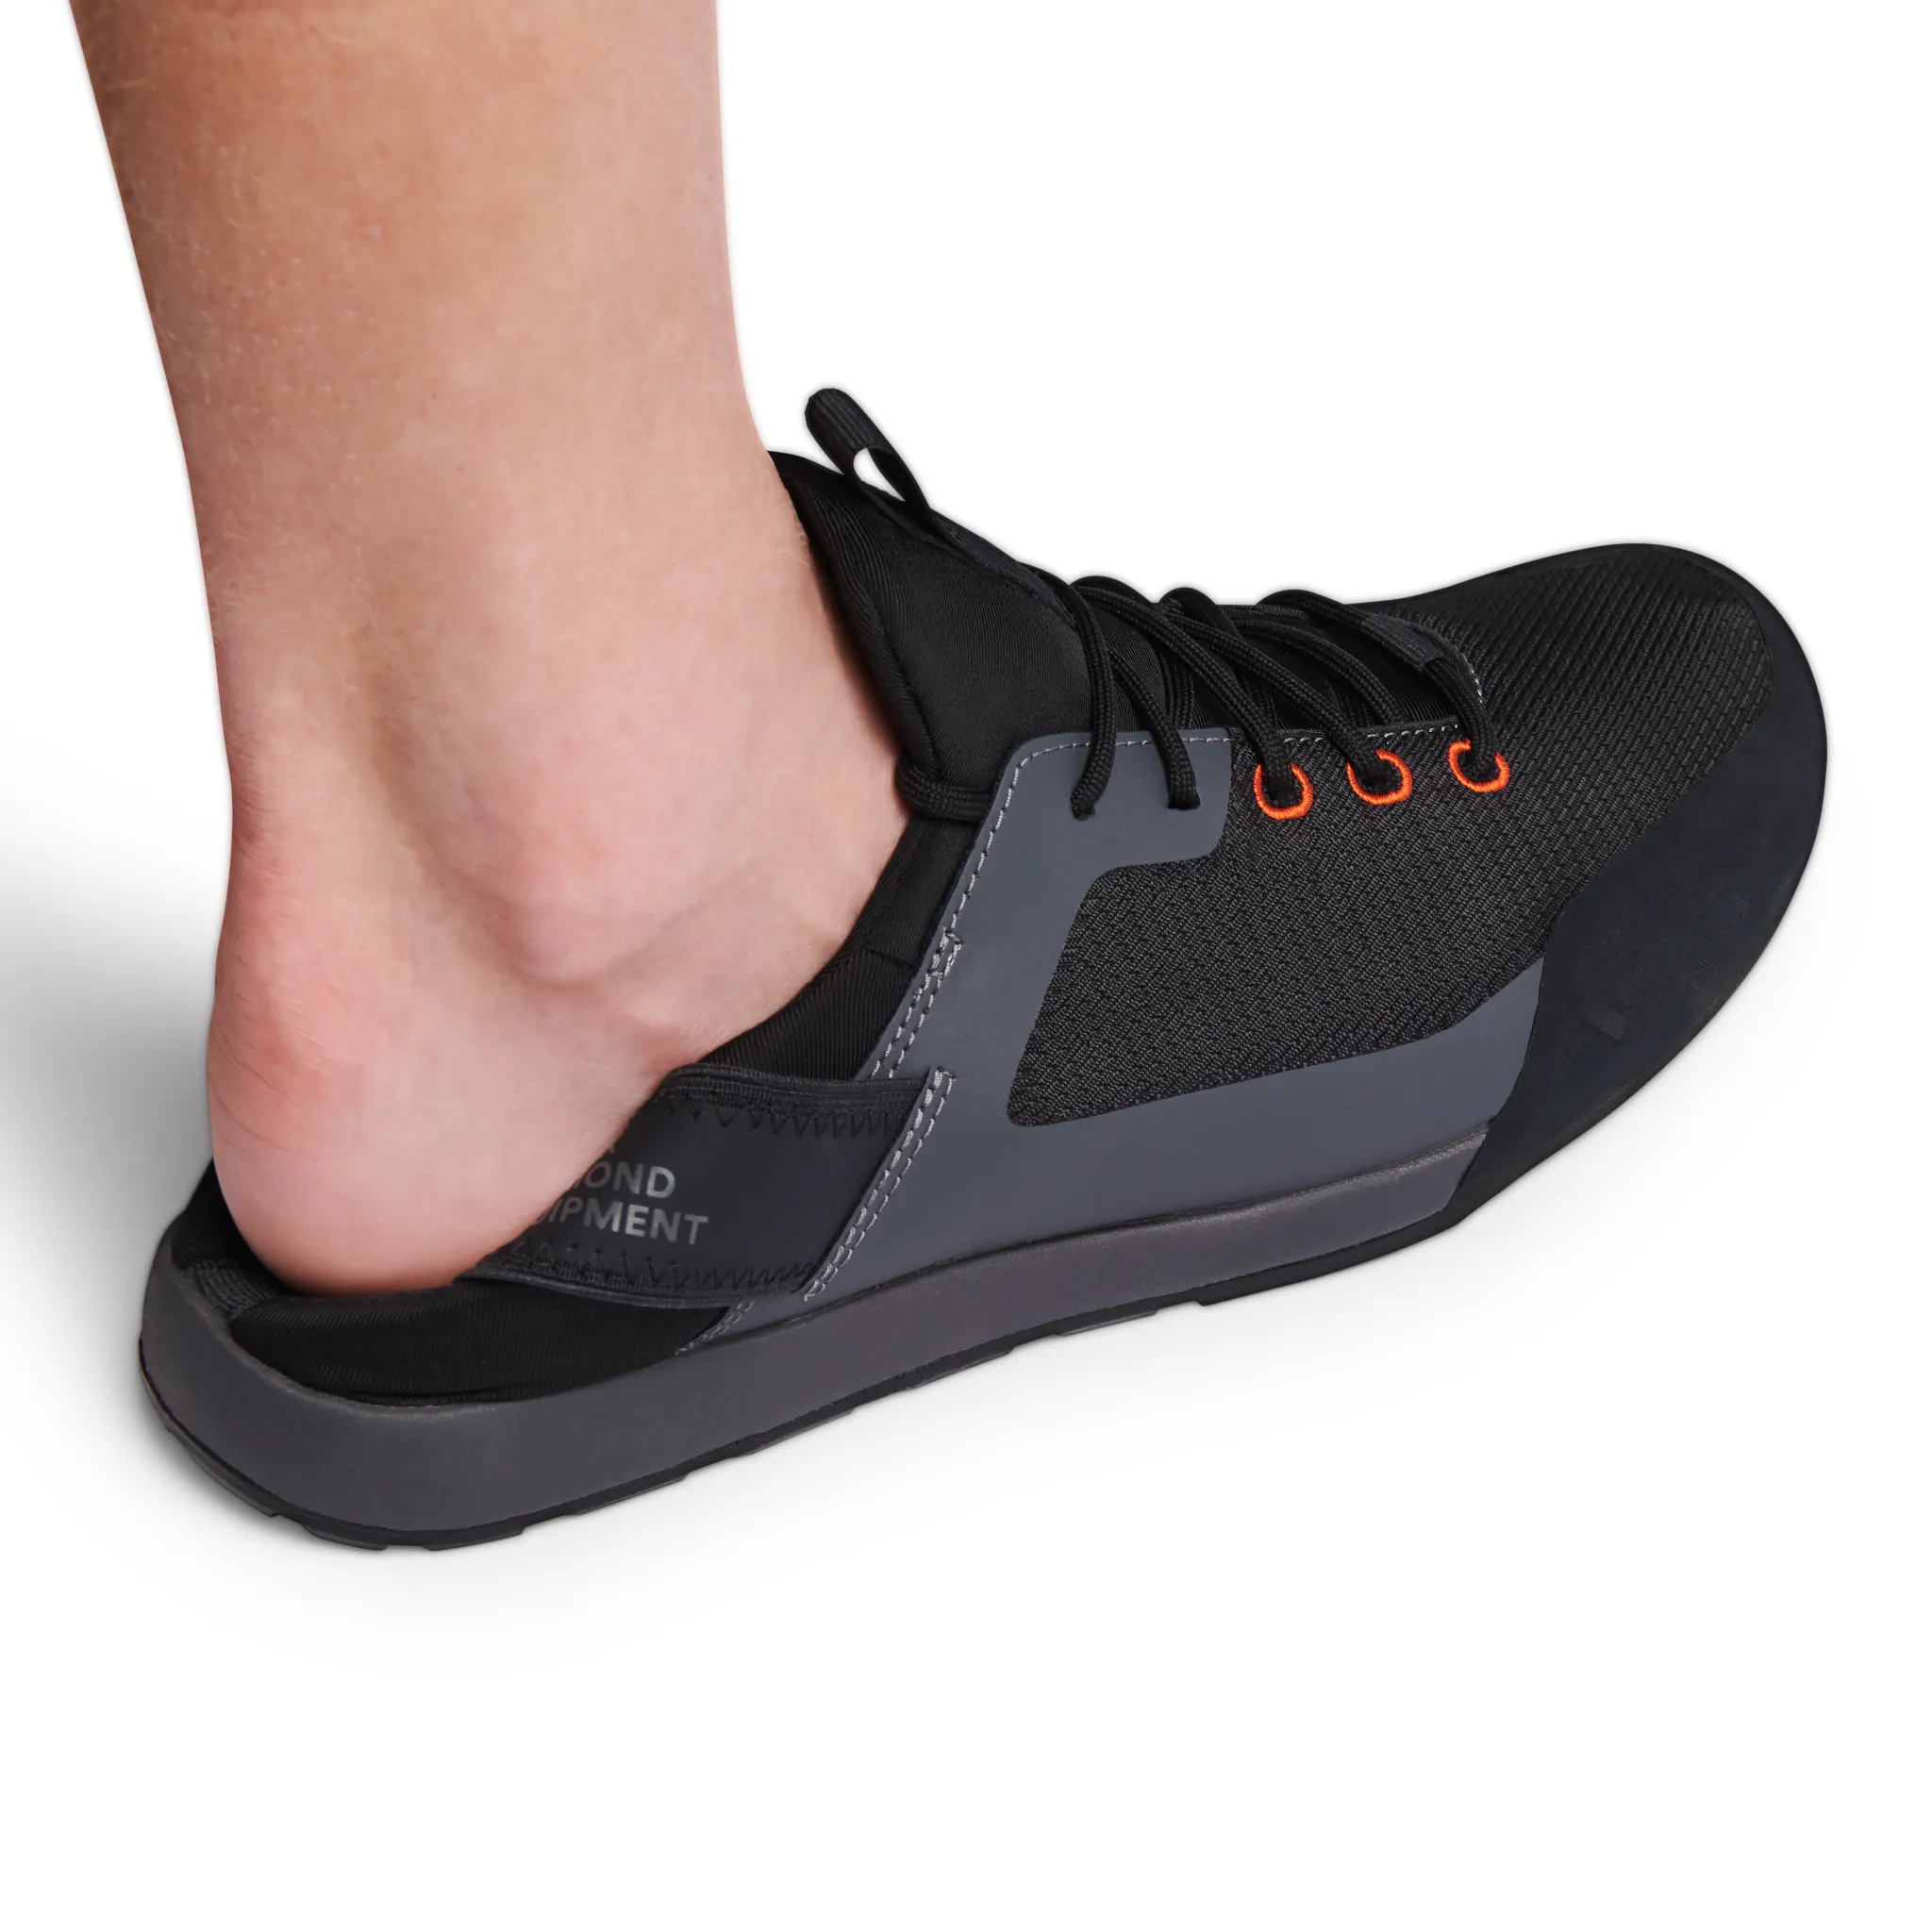 Stretch-fit heel and elastic heel strap for easy on/off at the gym or crag